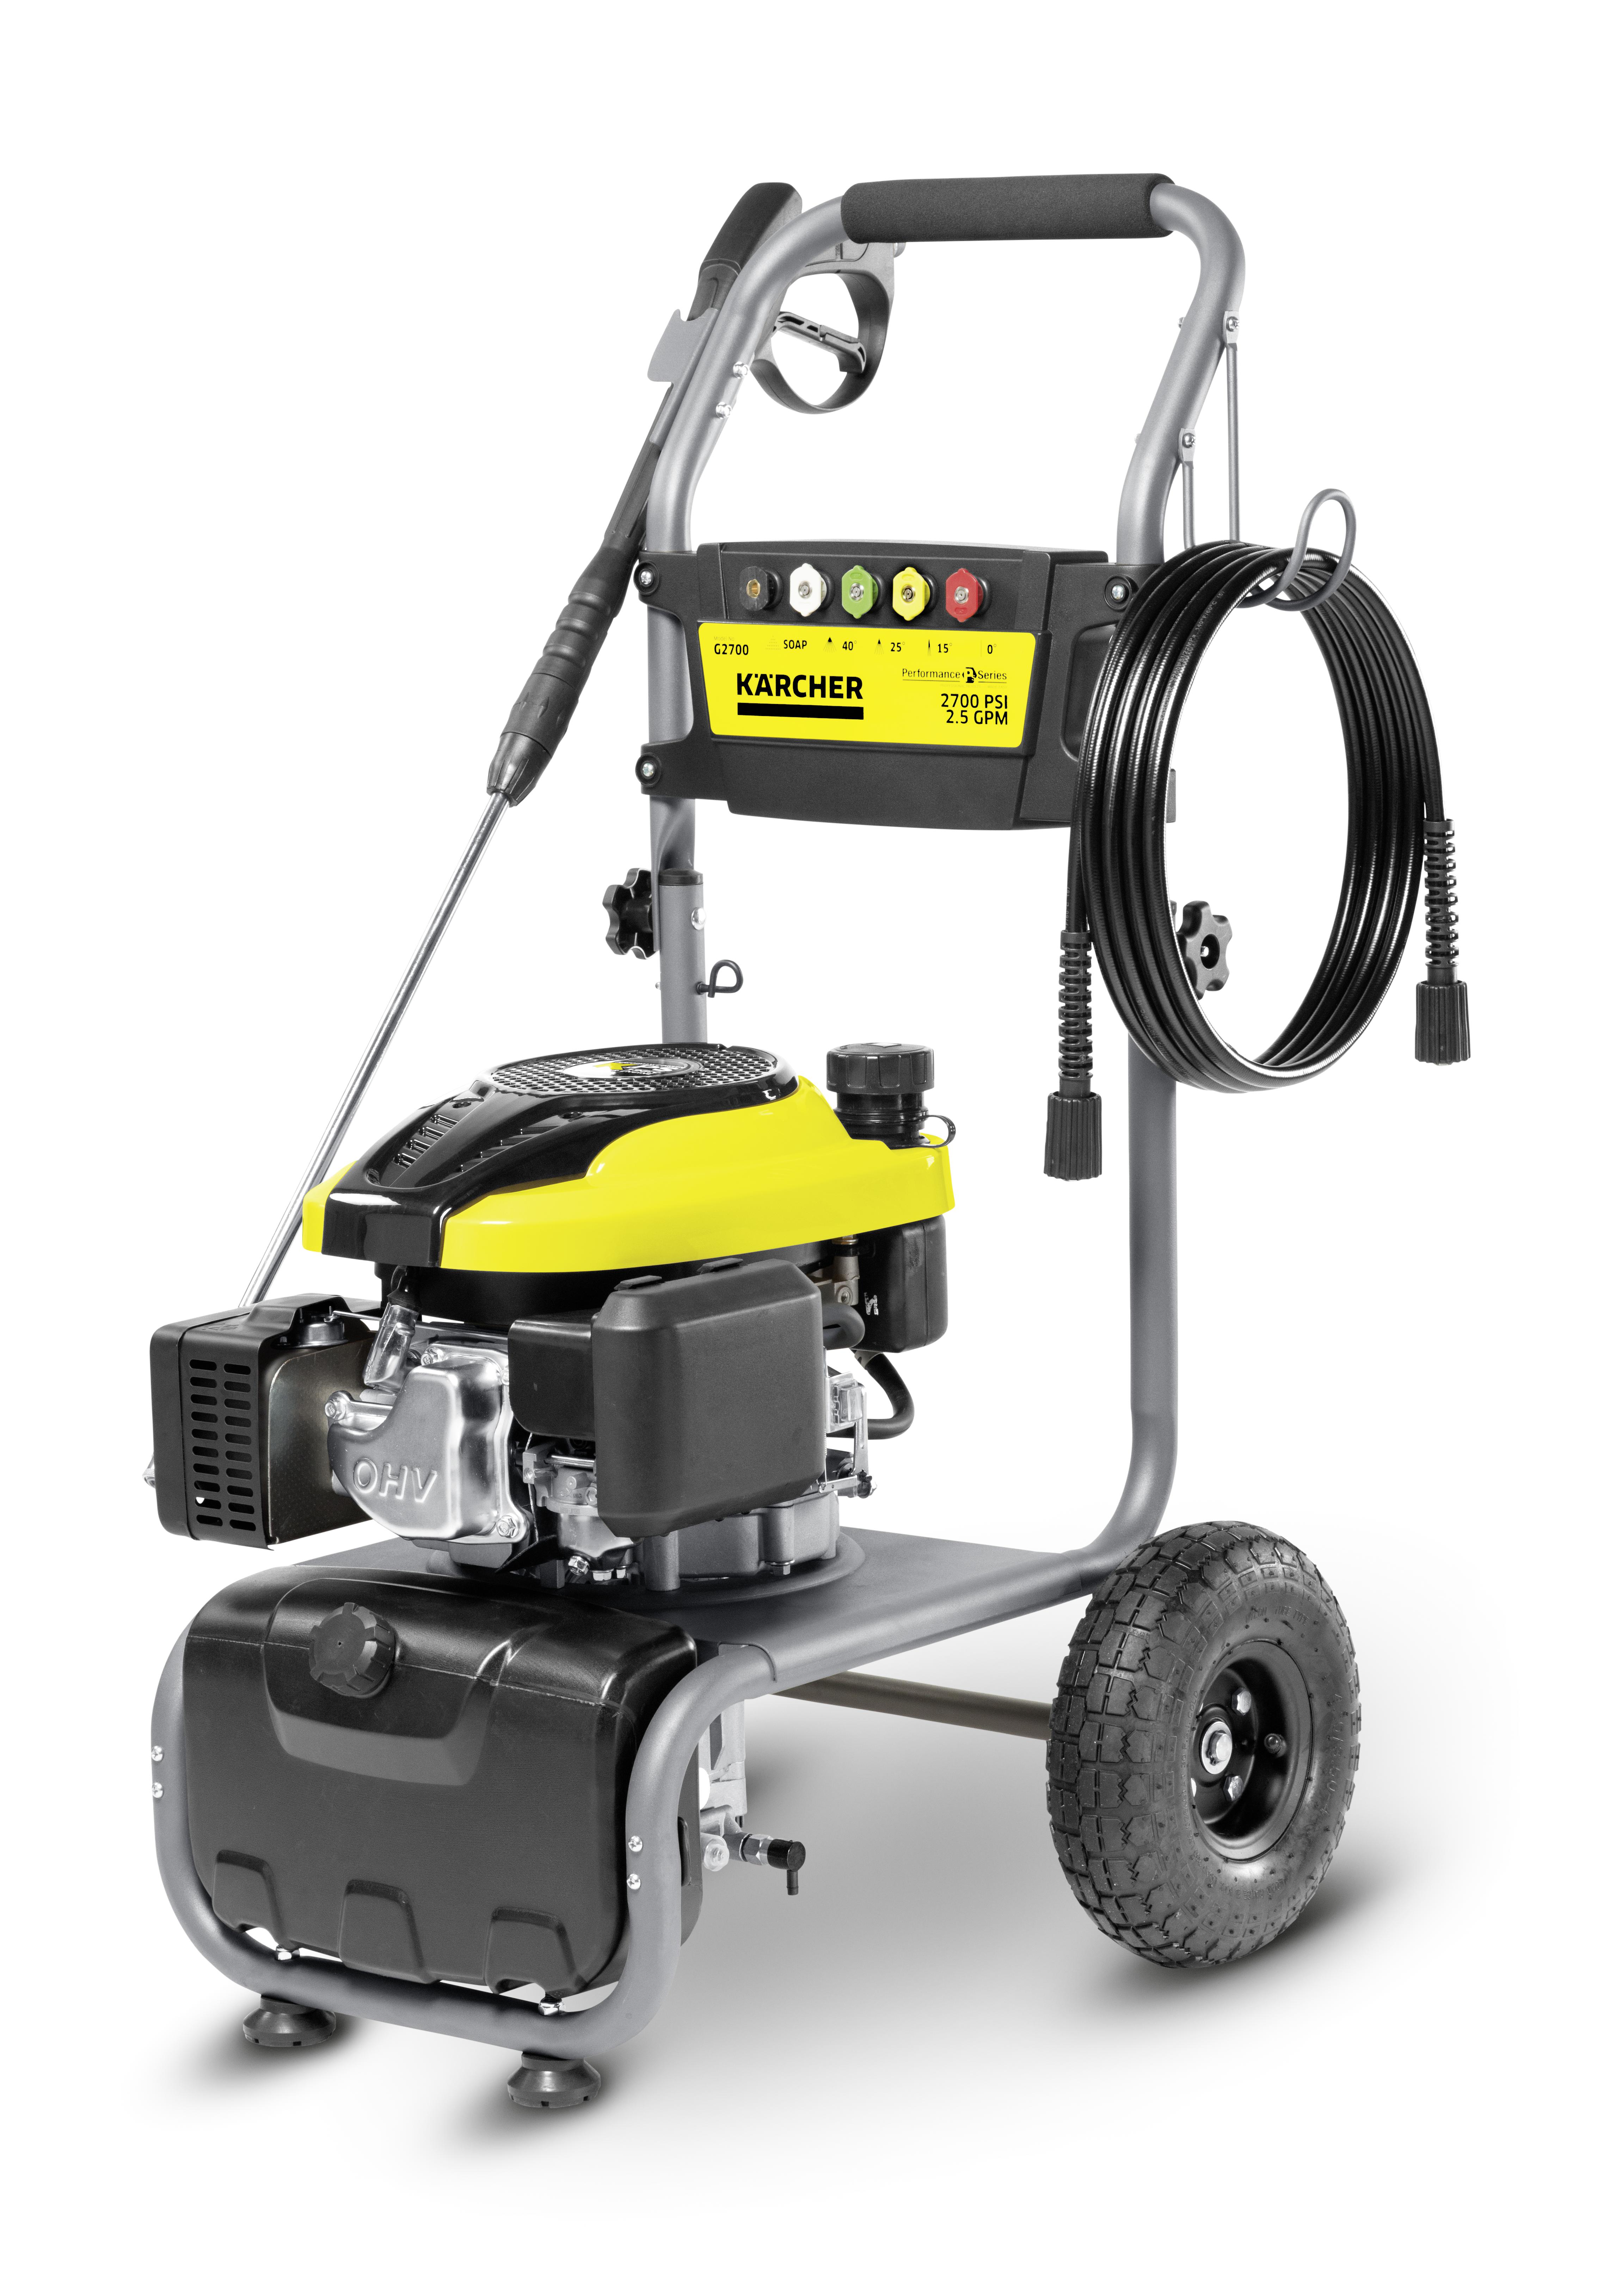 Karcher G2700 Performance Series 2700 PSI Gas Pressure Washer - image 1 of 5